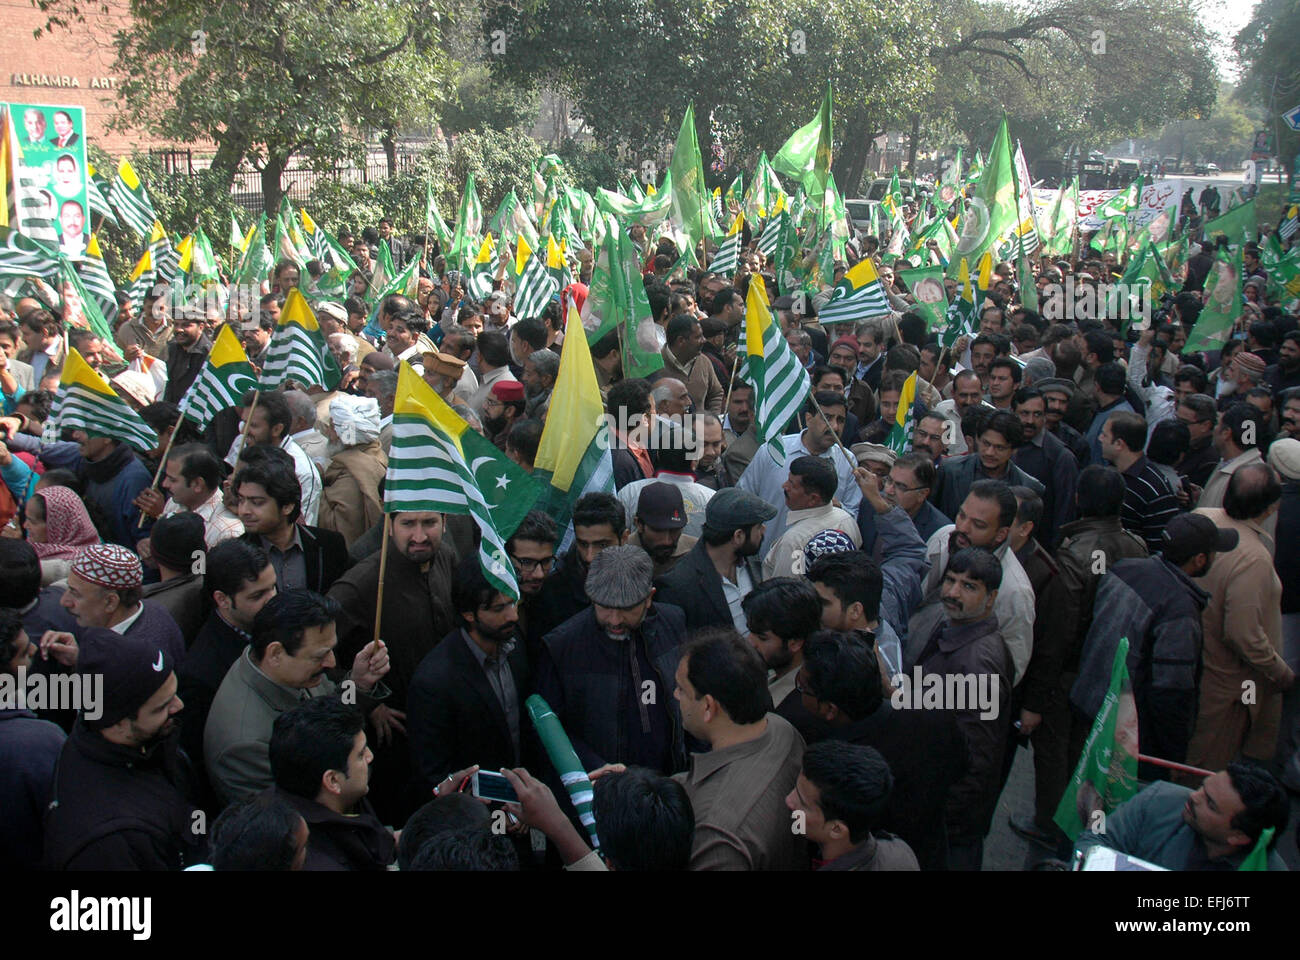 Lahore. 5th Feb, 2015. Demonstrators attend the Kashmir 'Solidarity Day' rally in eastern Pakistan's Lahore, Feb. 5, 2015. Pakistani Prime Minister Nawaz Sharif said on Thursday his country seeks 'meaningful and result oriented dialogue' with India for the resolution of outstanding issues. 'However the agenda of Pakistan-India dialogue will remain inconclusive without inclusion of Kashmir dispute,' he told legislators in Muzaffarabad, the capital of Pakistan-administered Kashmir. © Sajjad/Xinhua/Alamy Live News Stock Photo